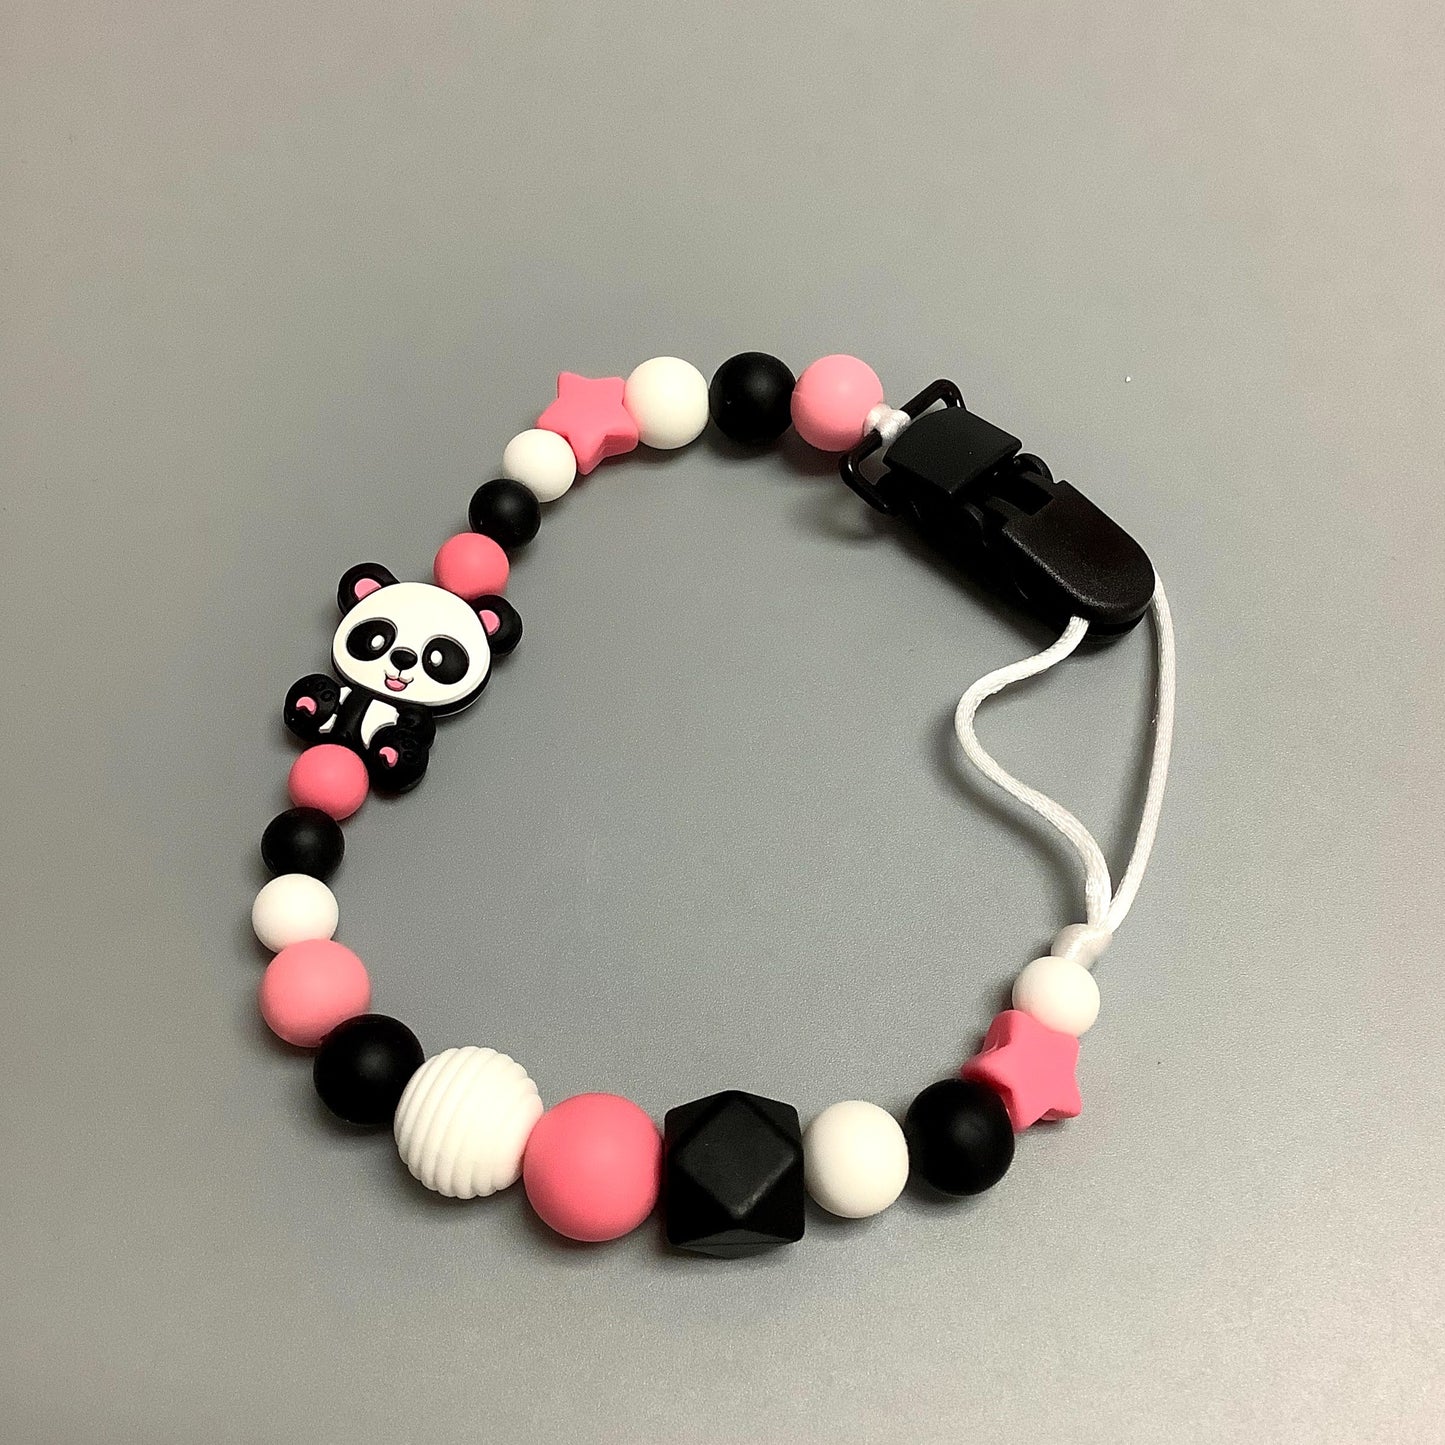 Silicone pacifier clip - Pink and black panda